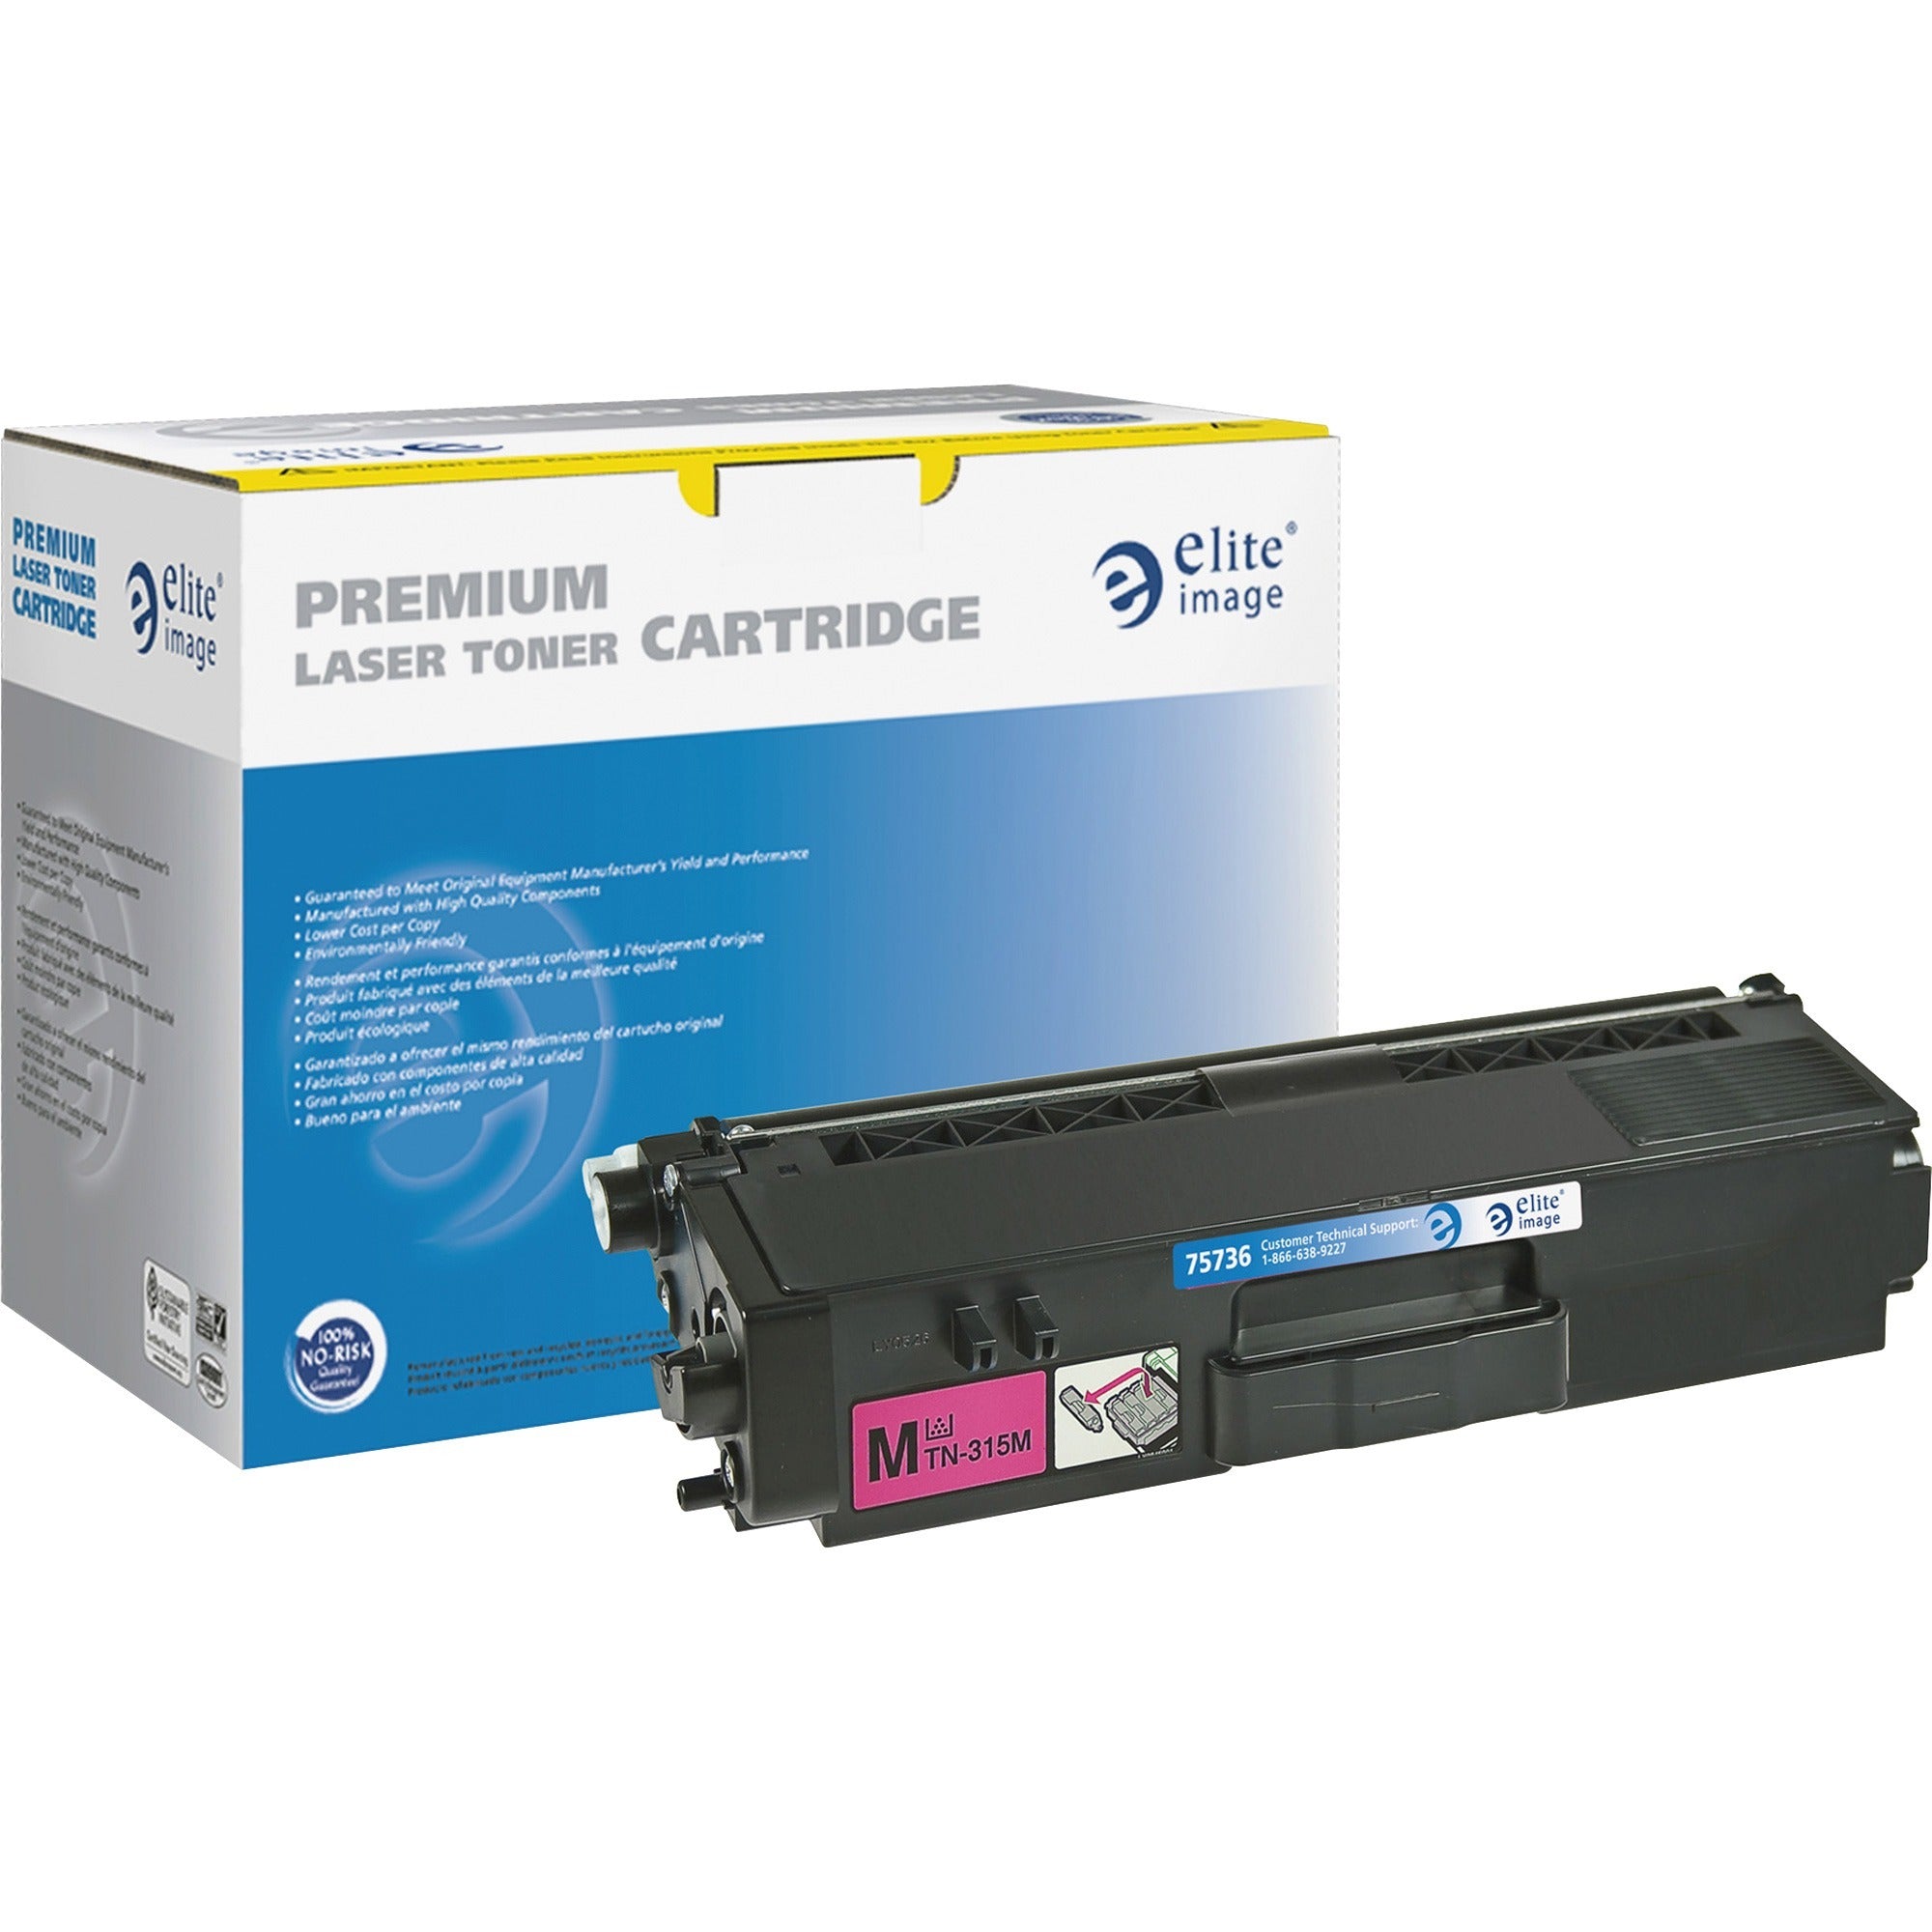 Elite Image Remanufactured High Yield Laser Toner Cartridge - Alternative for Brother TN315 - Magenta - 1 Each - 3500 Pages